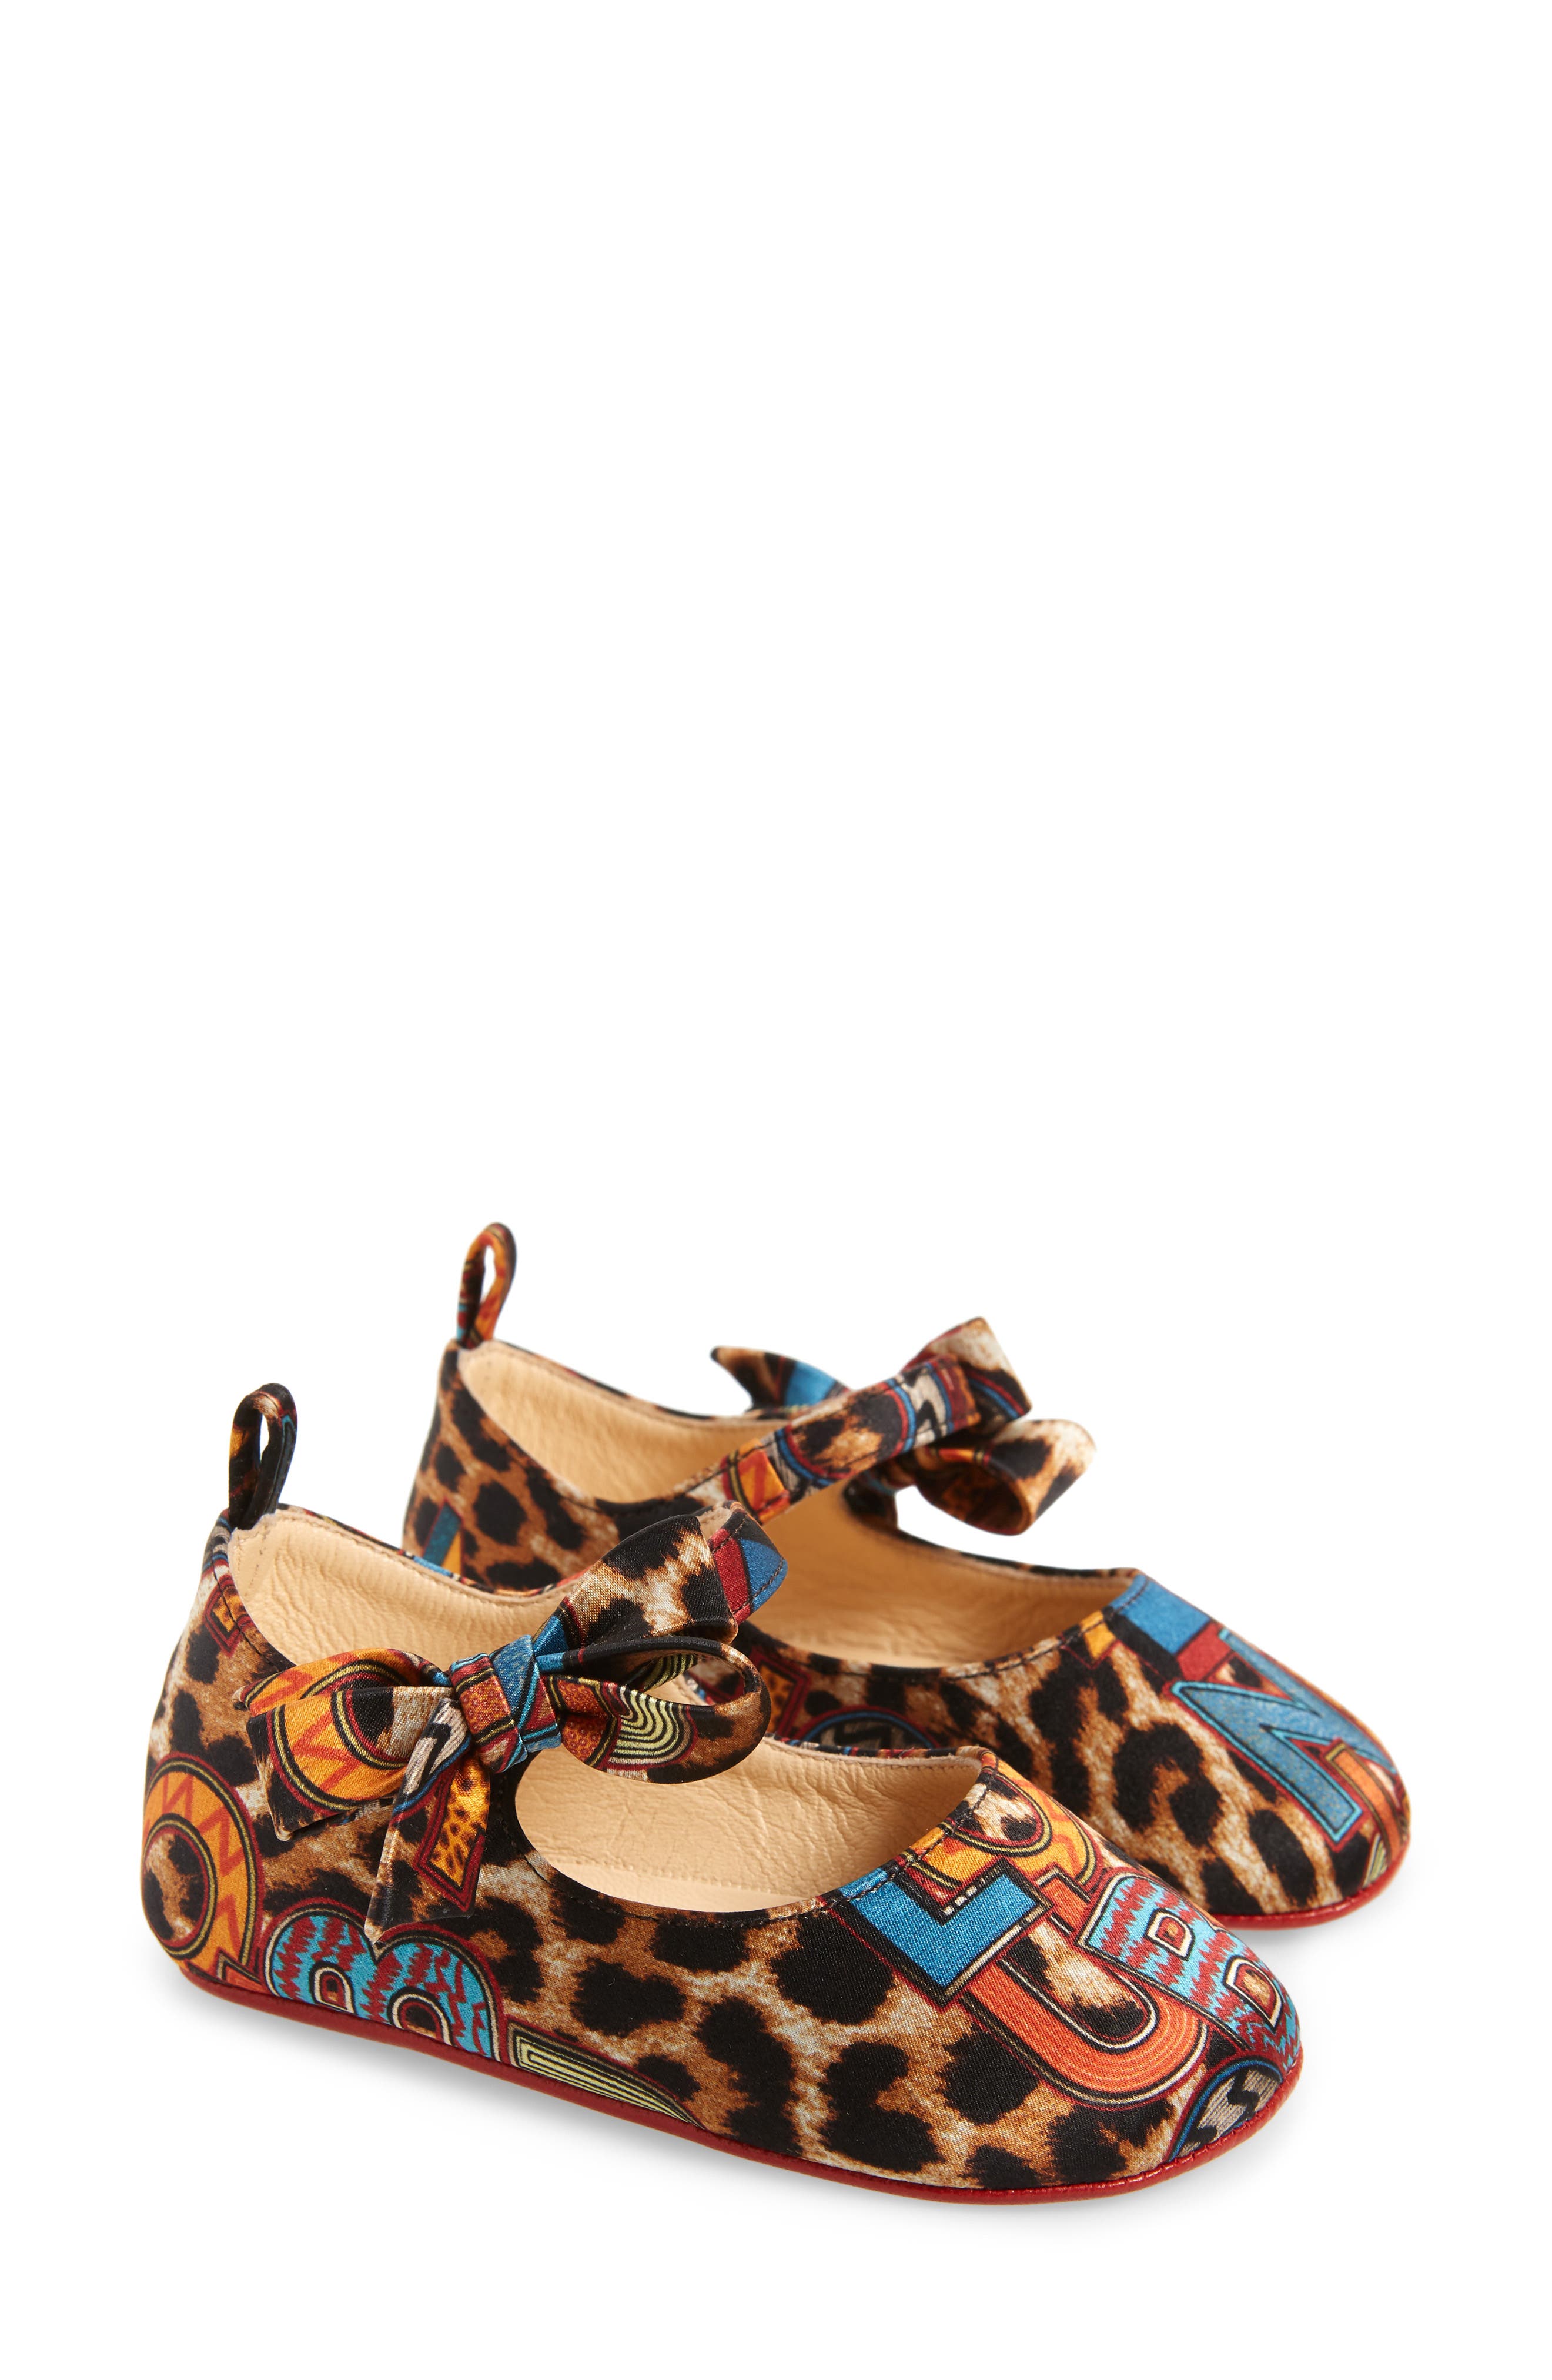 christian louboutin baby shoes for sale